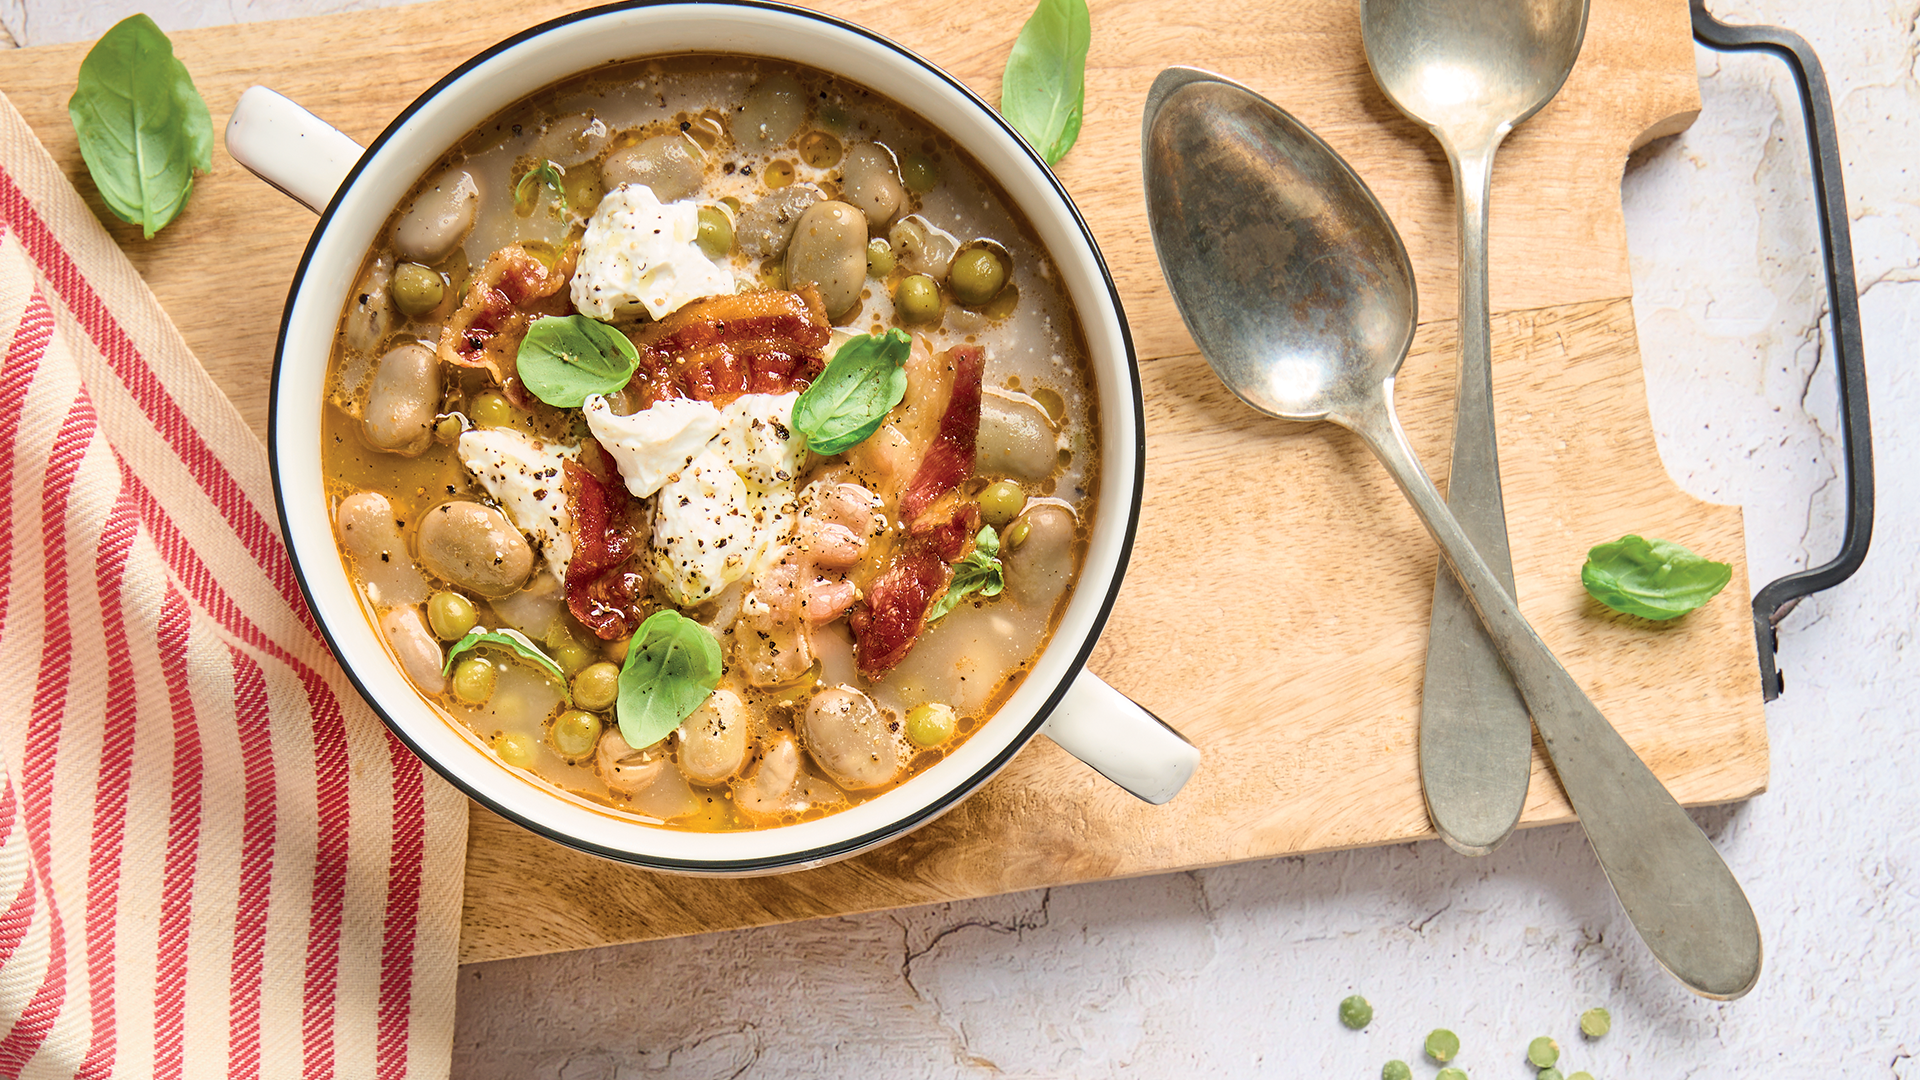 Fava beans and peas soup with burrata and crispy bacon